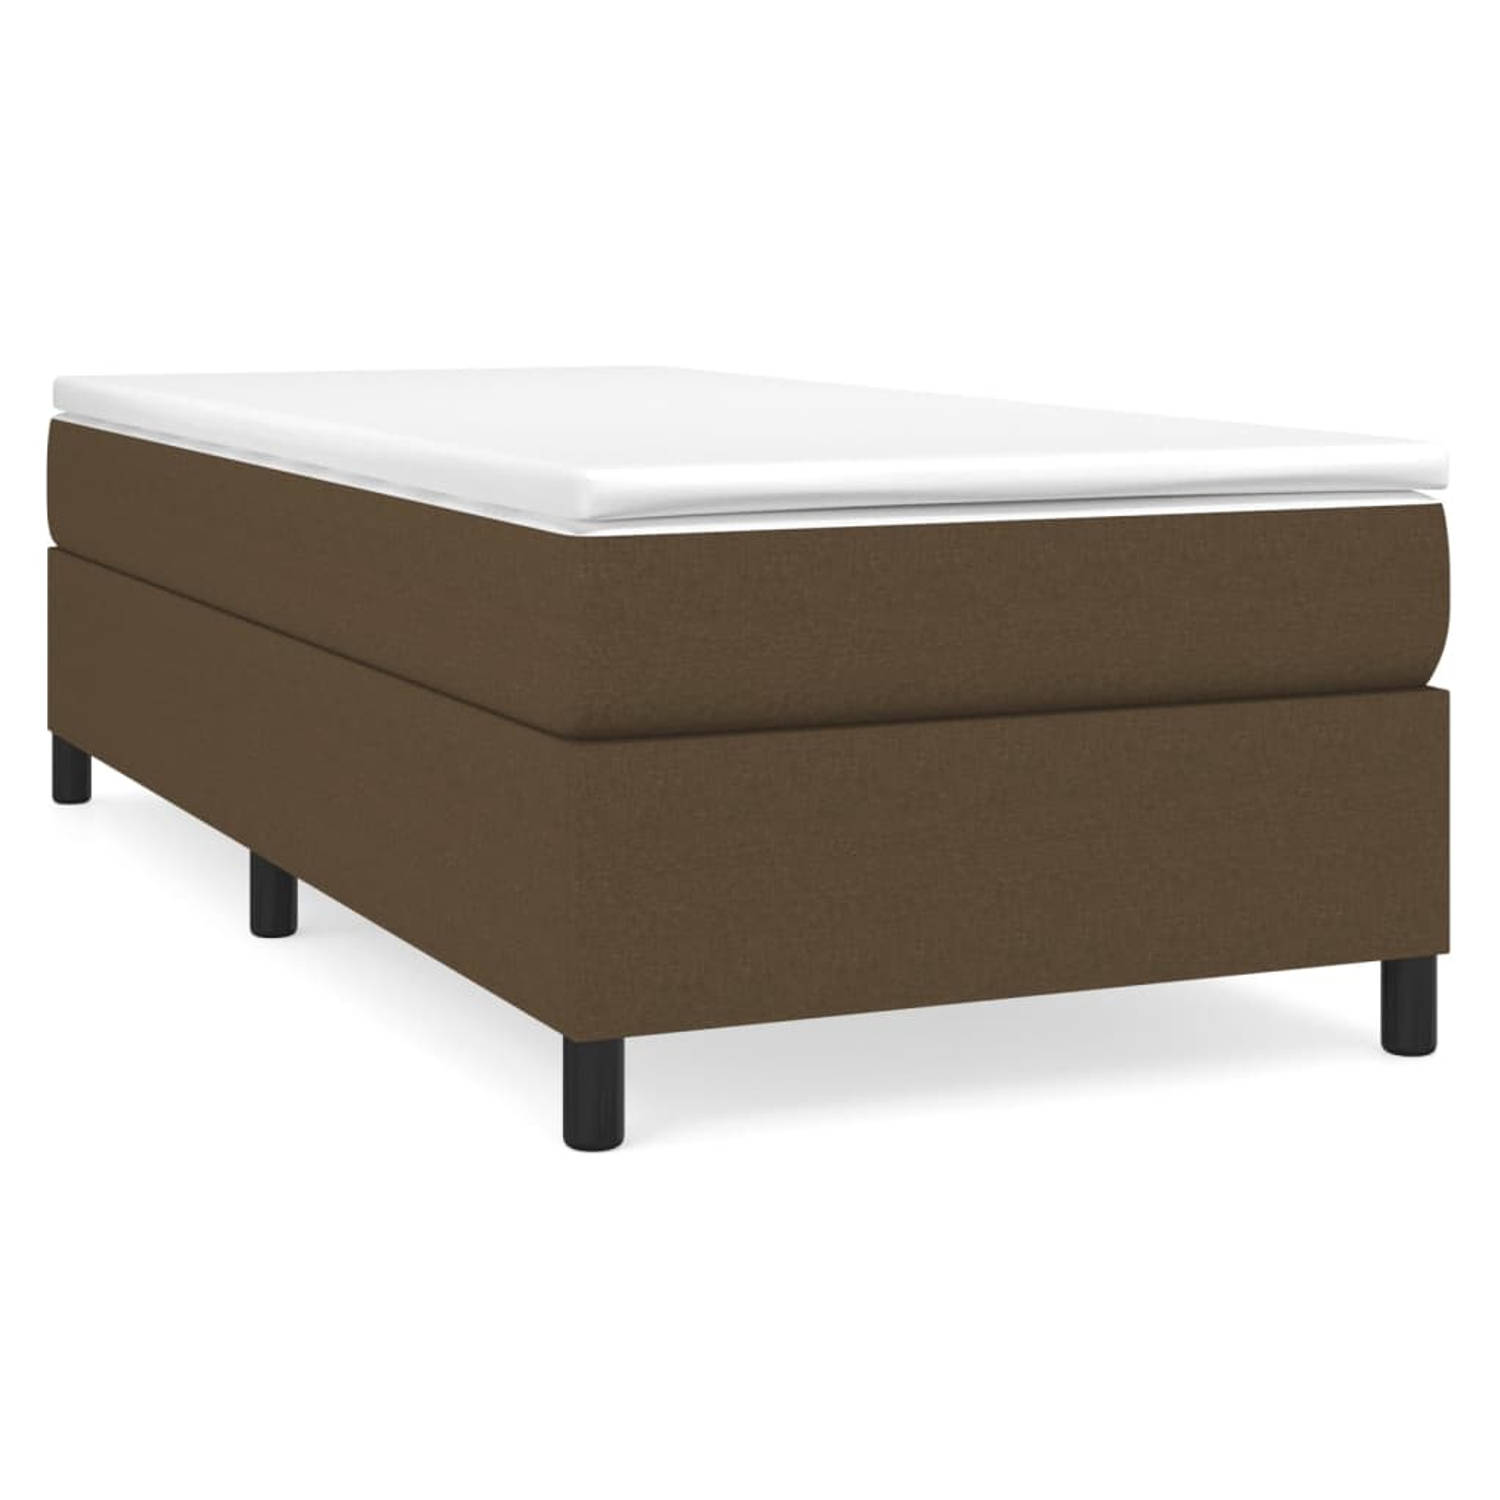 The Living Store Boxspring met matras stof donkerbruin 90x200 cm - Boxspring - Boxsprings - Bed - Slaapmeubel - Boxspringbed - Boxspring Bed - Eenpersoonsbed - Bed Met Matras - Bed